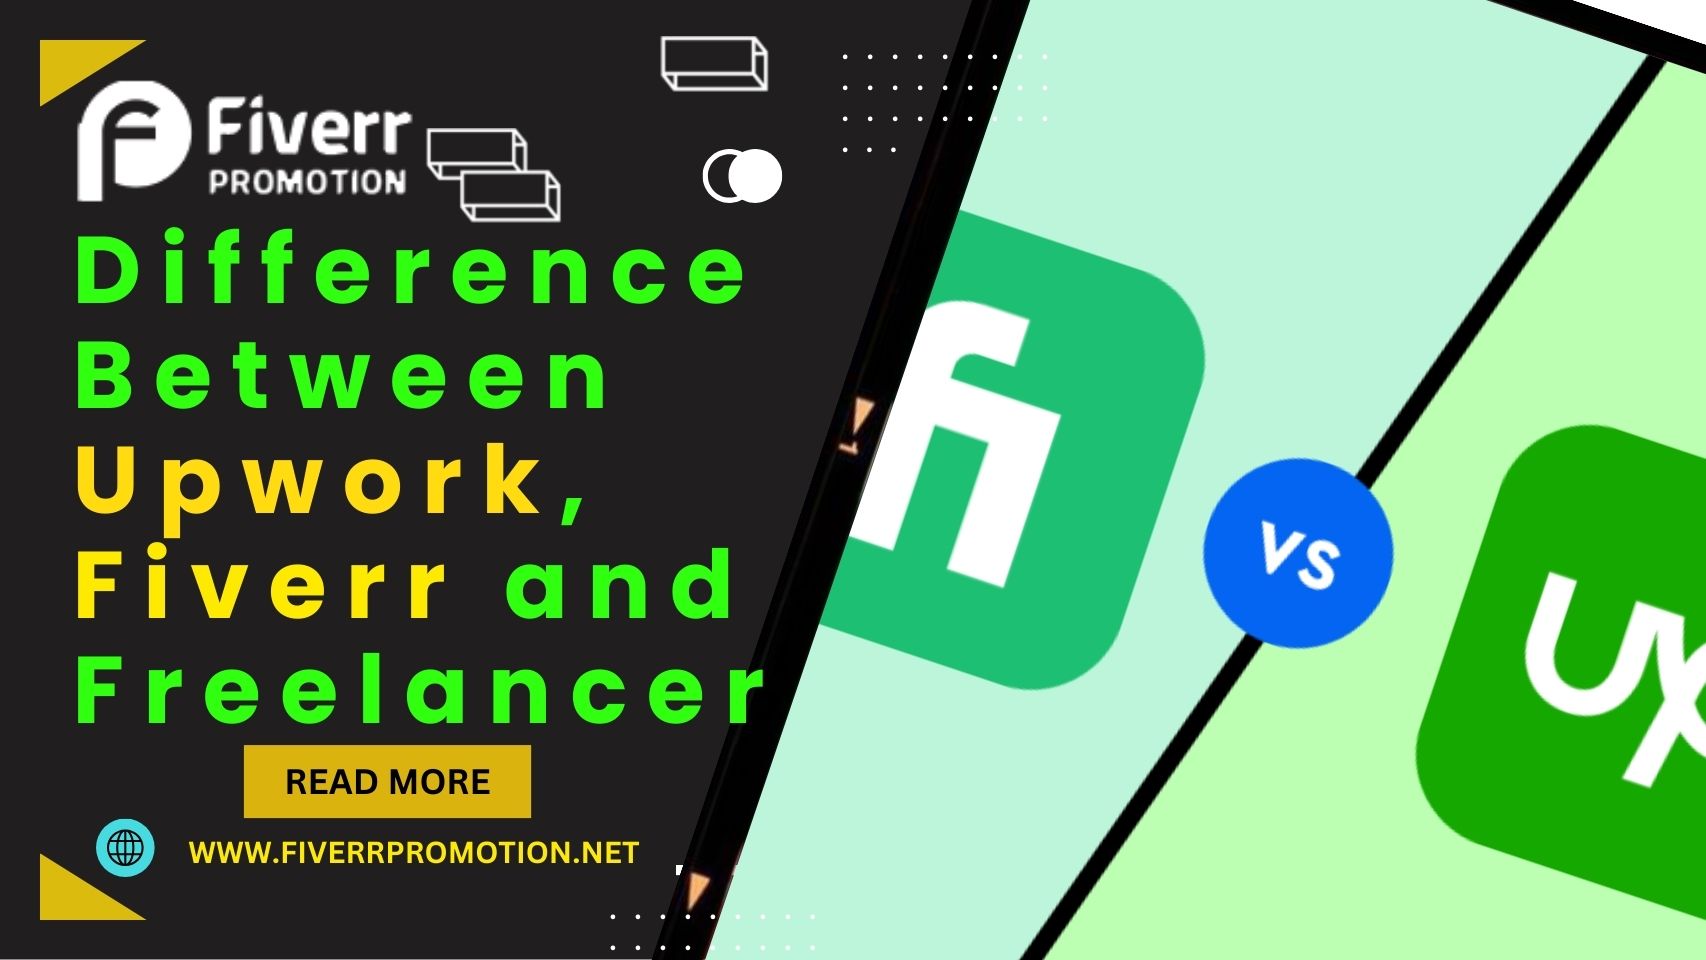 Difference Between Upwork, Fiverr and Freelancer